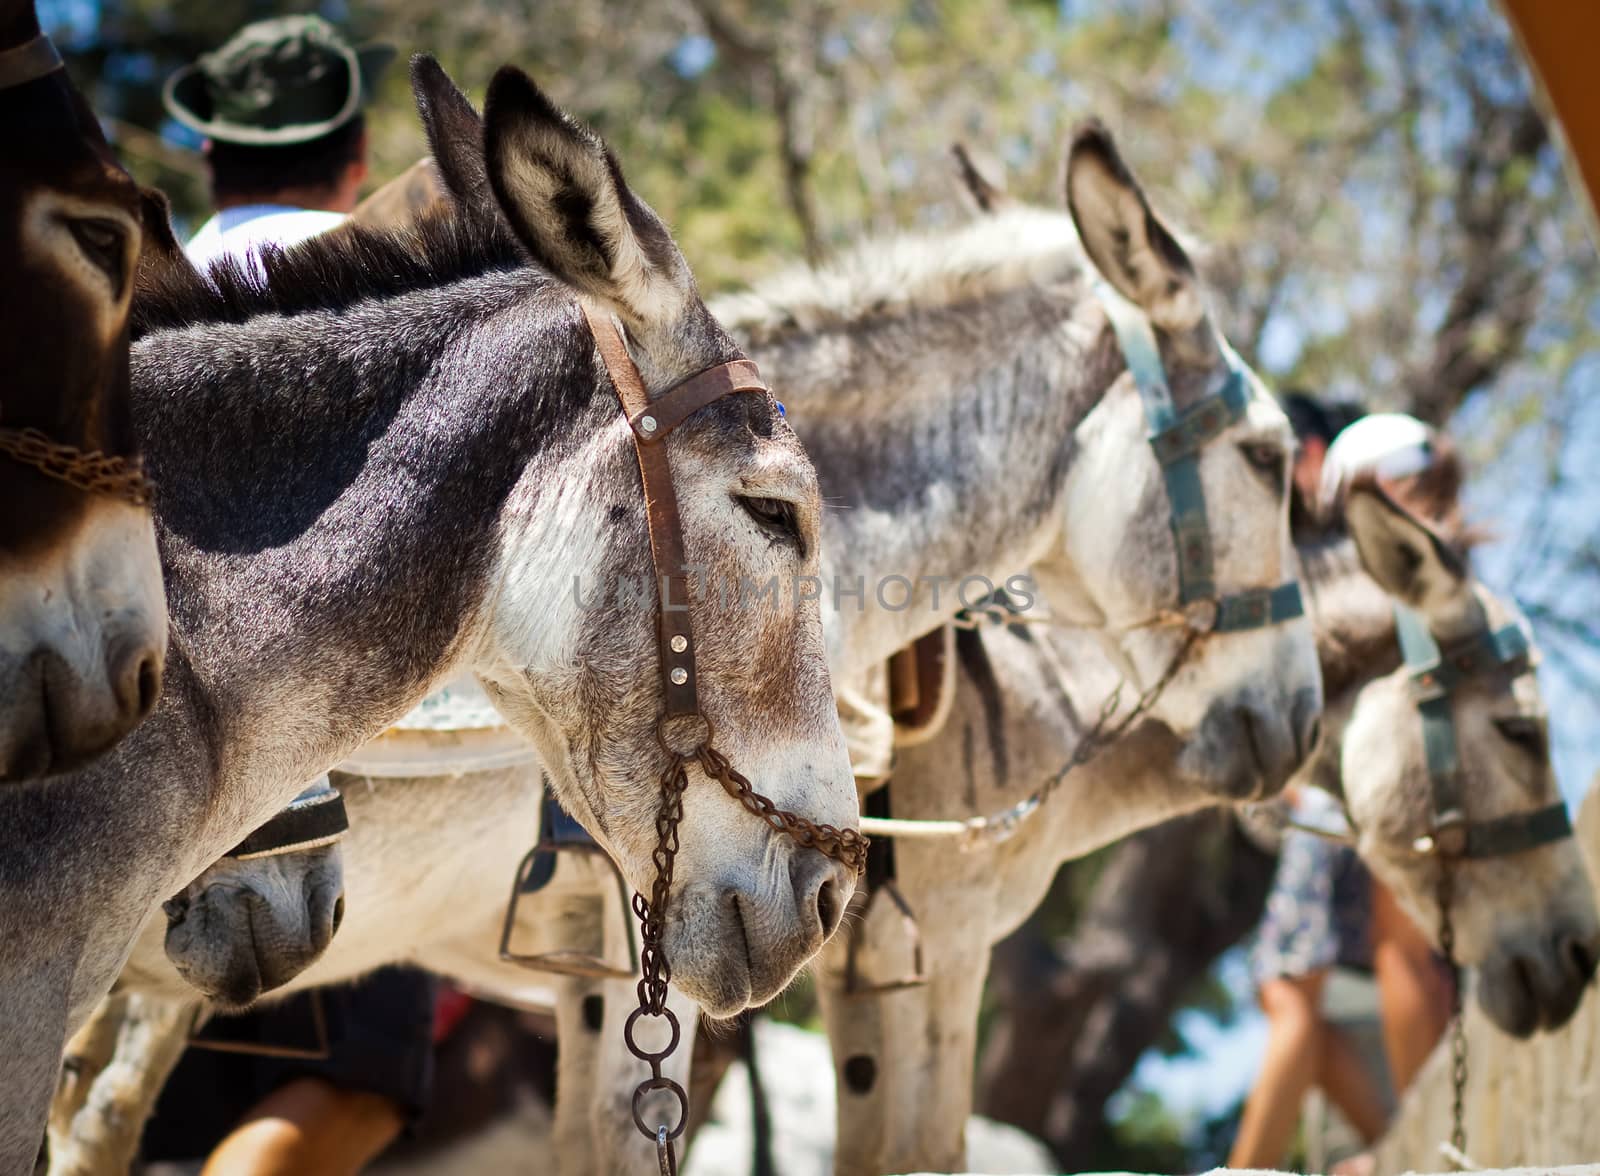 Donkey taxi in Lindos